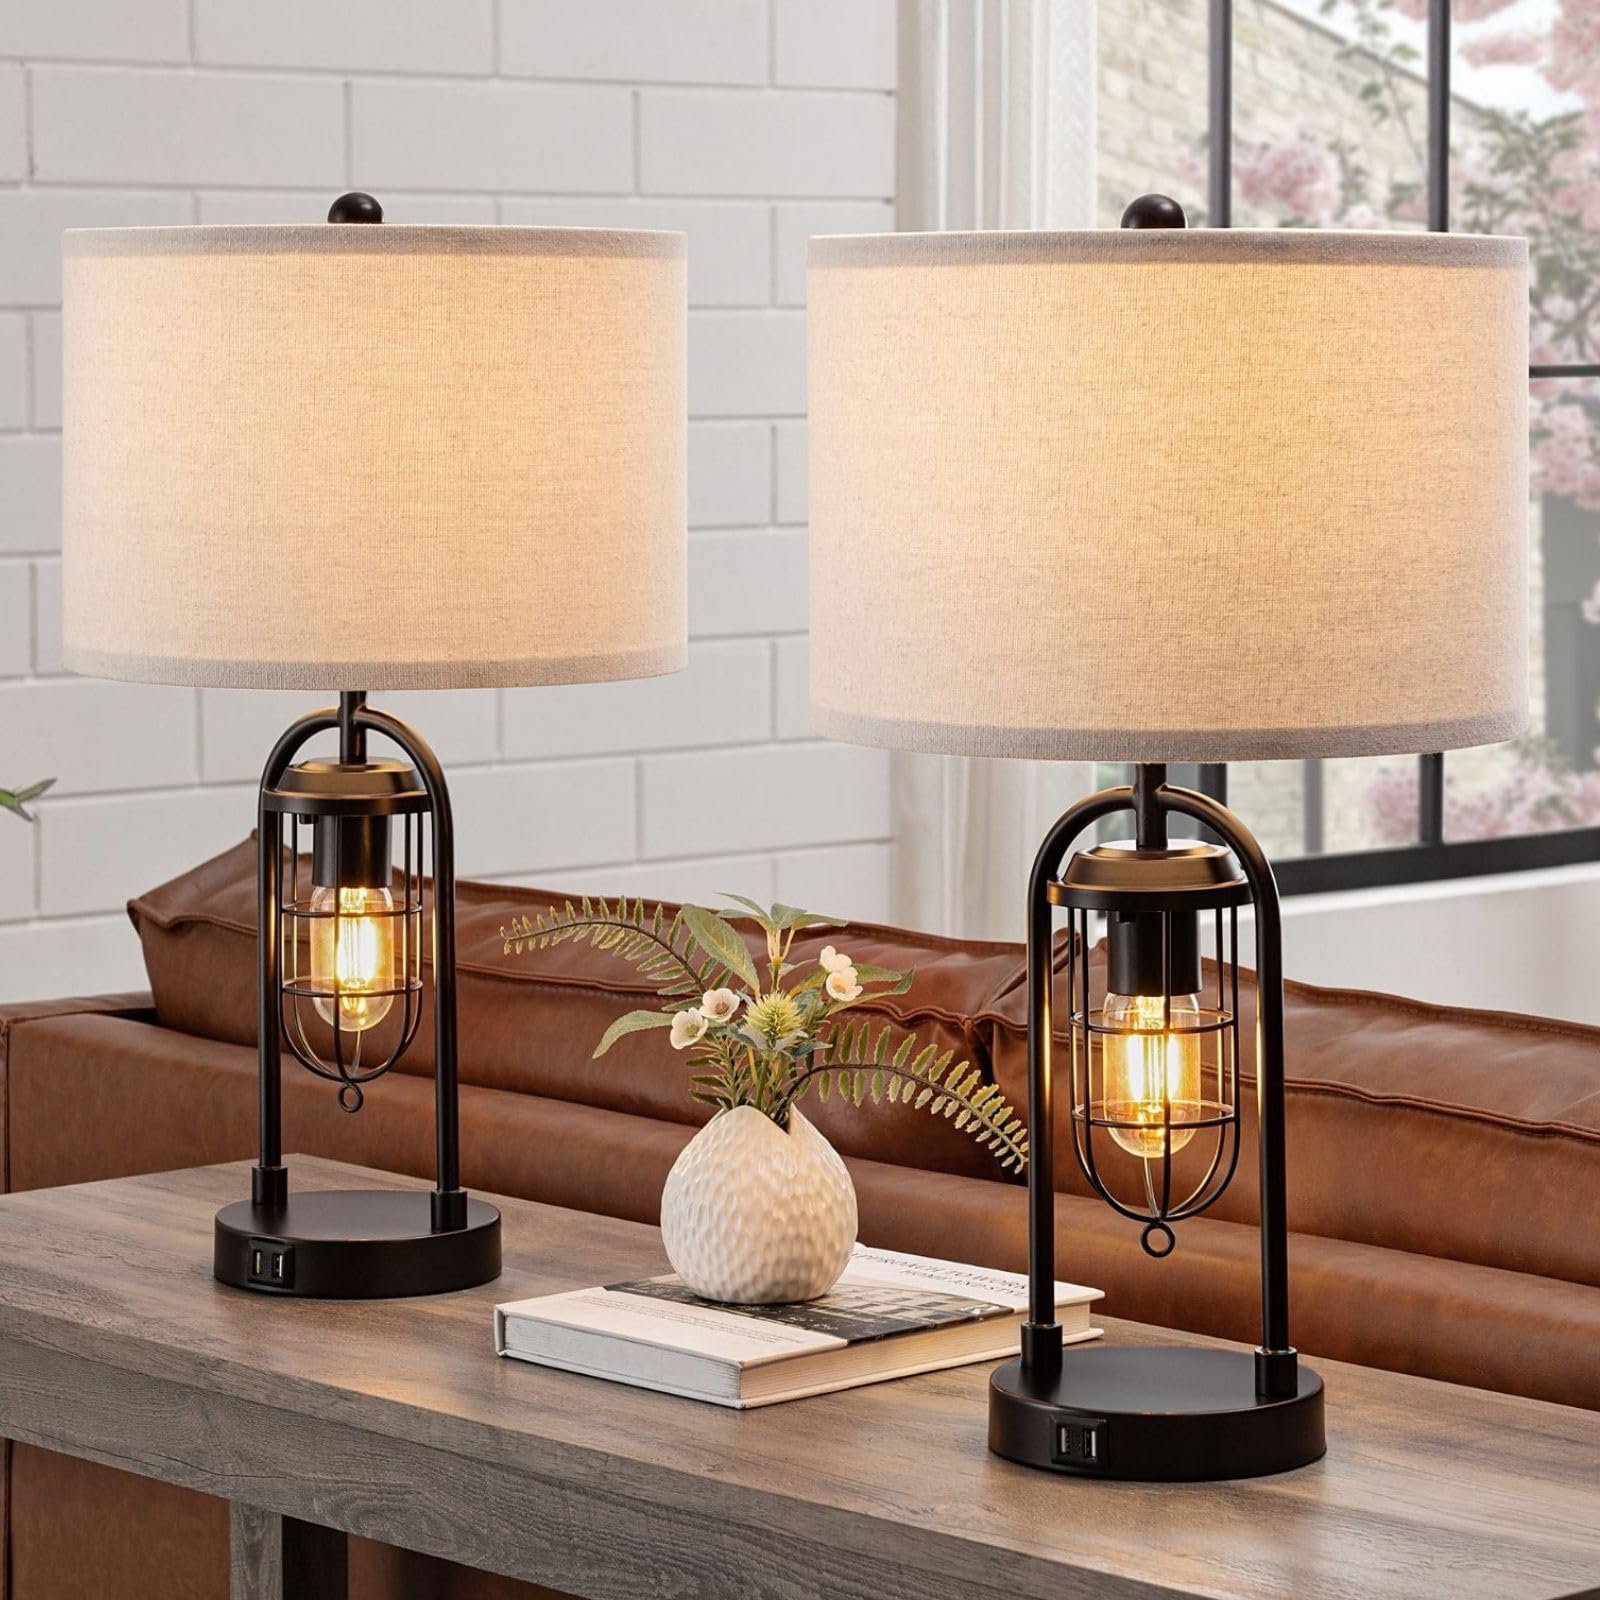 Set of 2 Farmhouse Table Lamps with USB Ports and Modern Nightstand